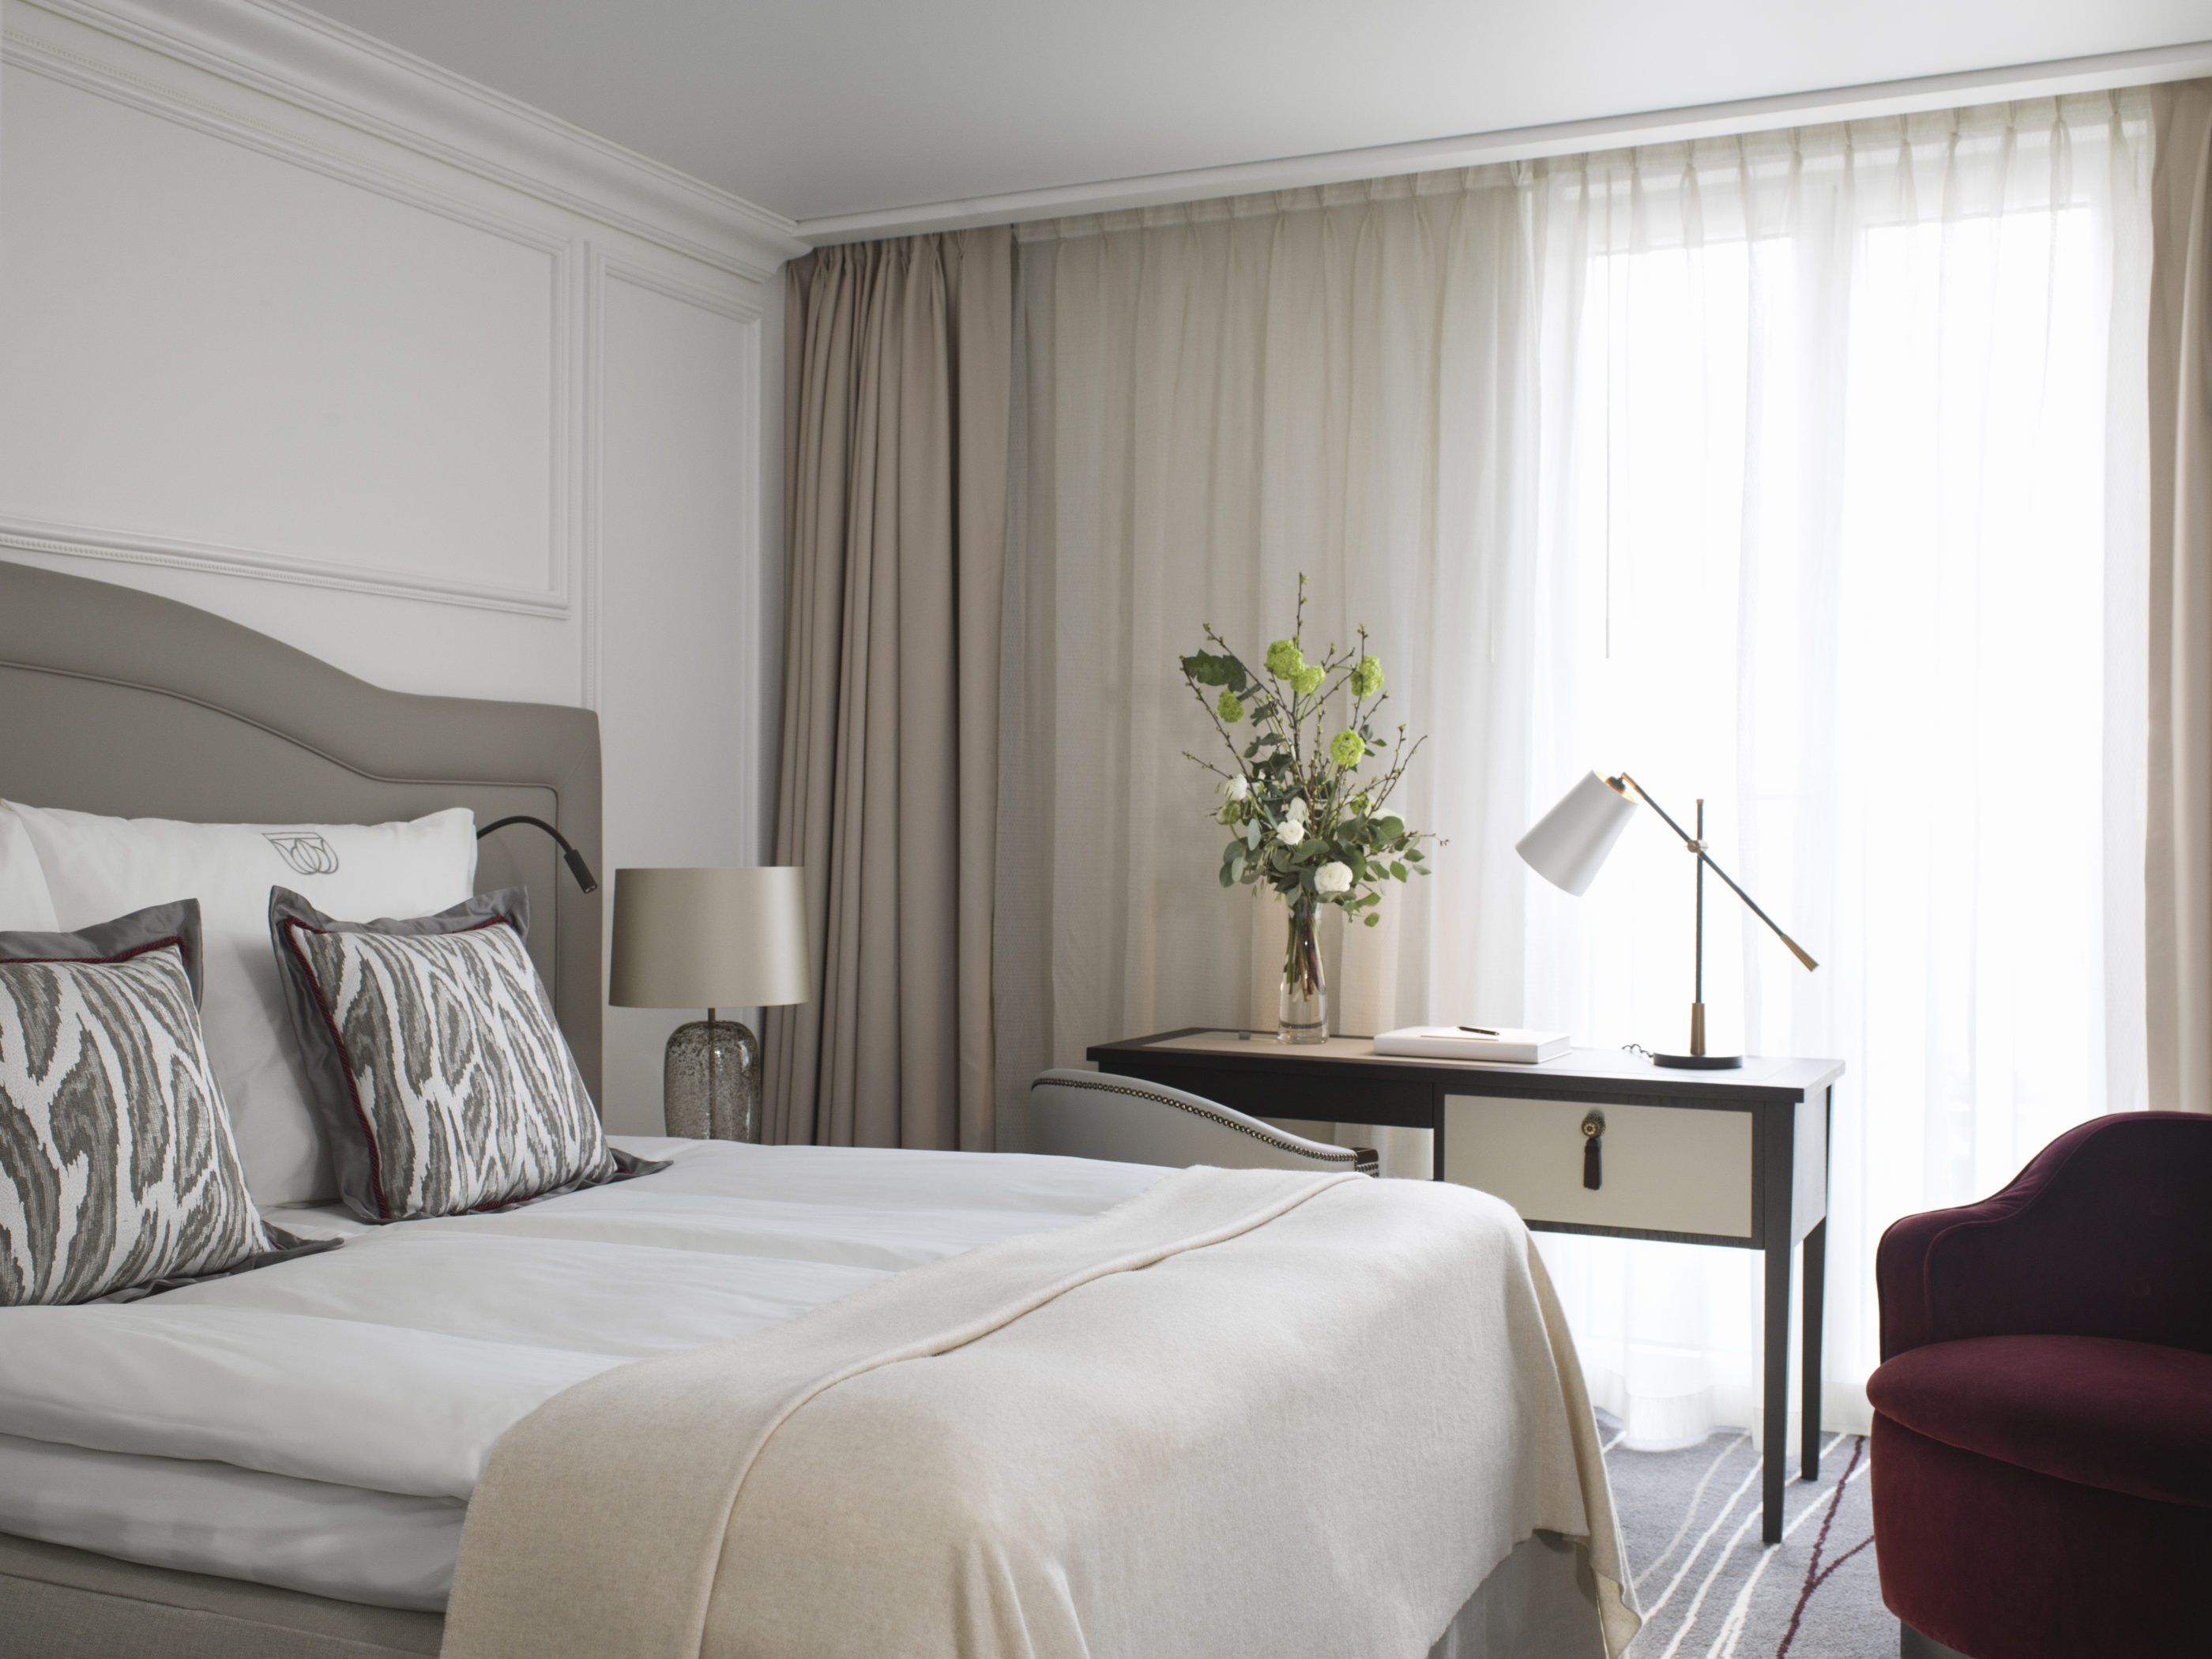 Britannia Hotel in Trondheim’s Superior double room, styled by Metropolis Interior Architects.